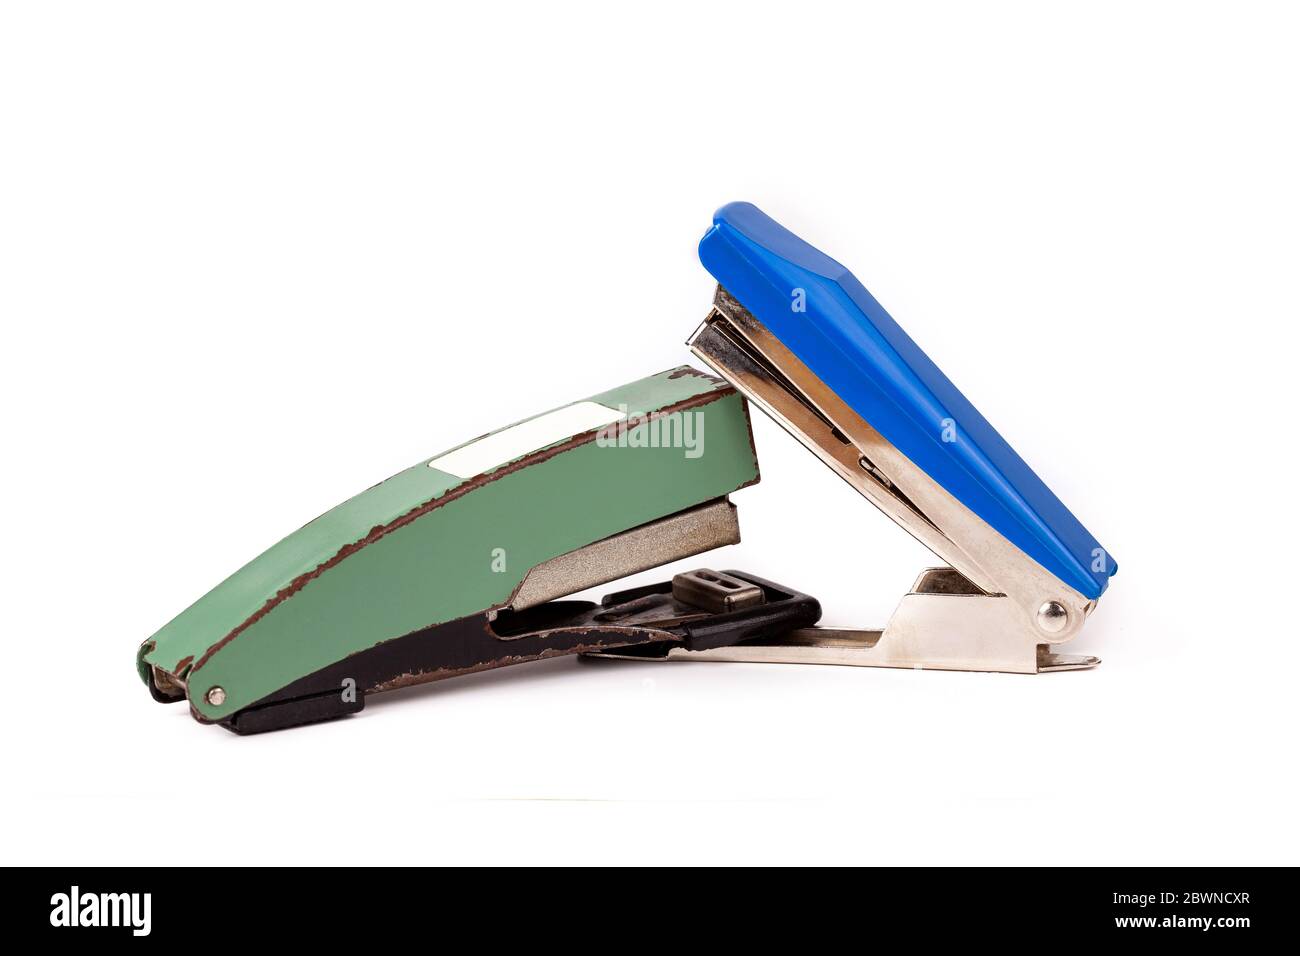 Two staplers fighting, stapling, biting each other. New vs old fight, new winning Office war, desk accessories duel, brawl, conflict funny abstract Stock Photo